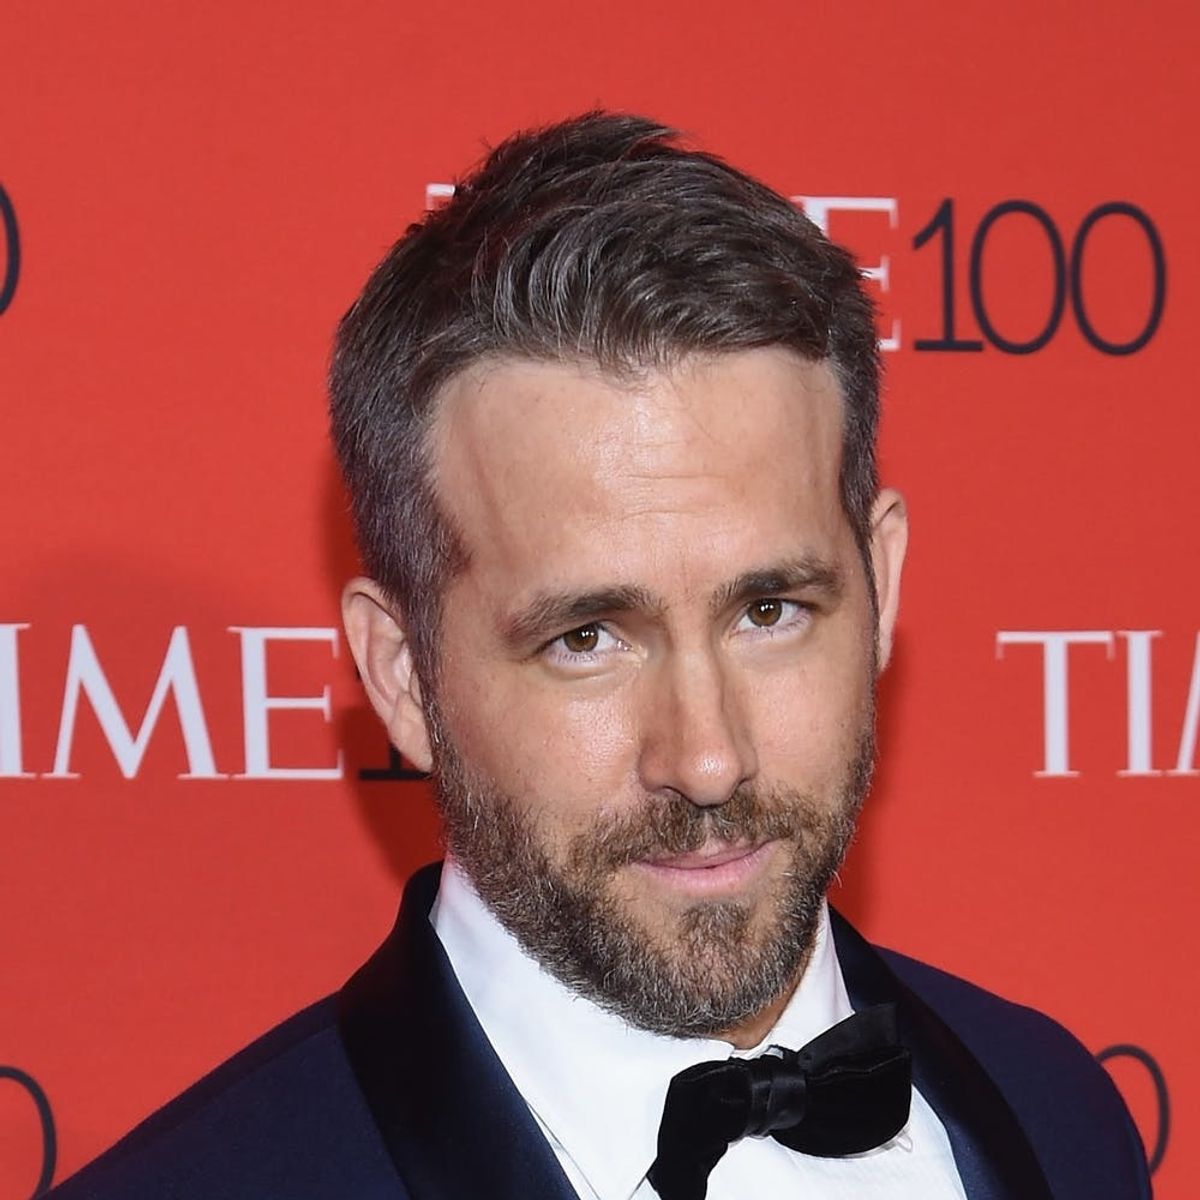 Ryan Reynolds Just Shared an Epic Throwback Pic That Will Have You Longing for the ’90s